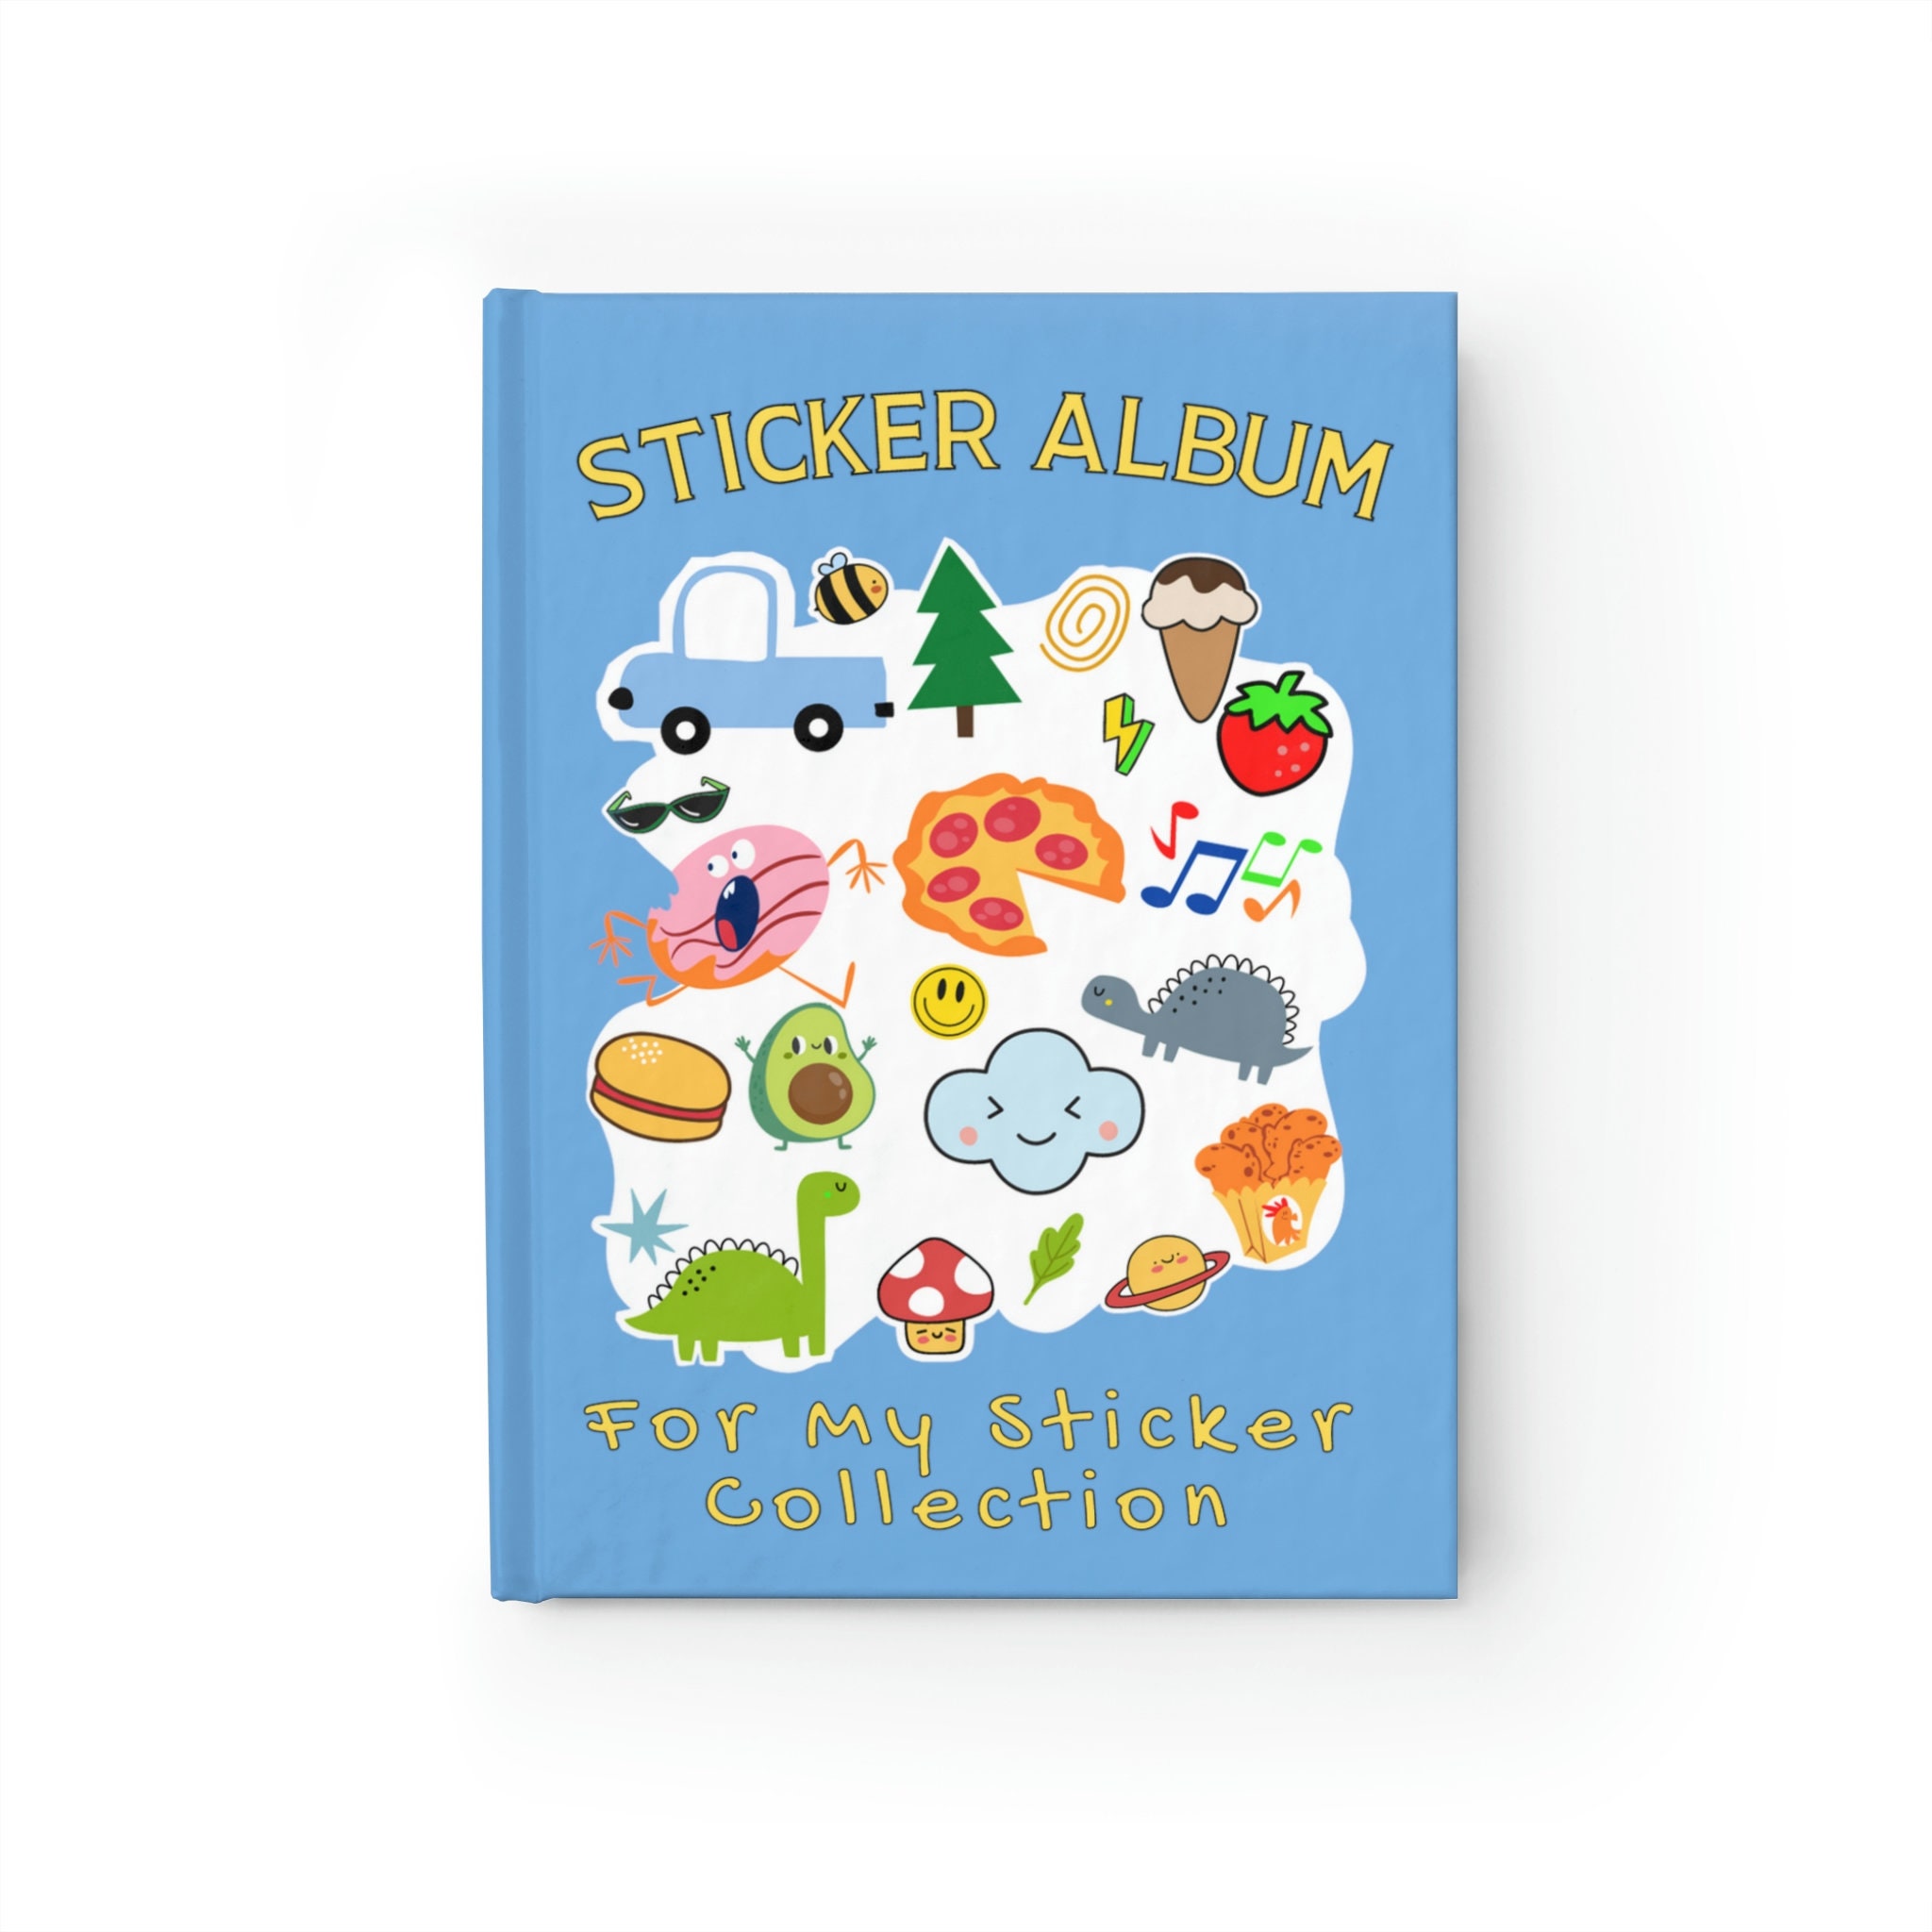 My Stickers Collecting Album: The Perfect Blank Sticker Book For Kids|  Blank Sticker Book for Collecting Stickers| Over 100 Empty Pages For Your